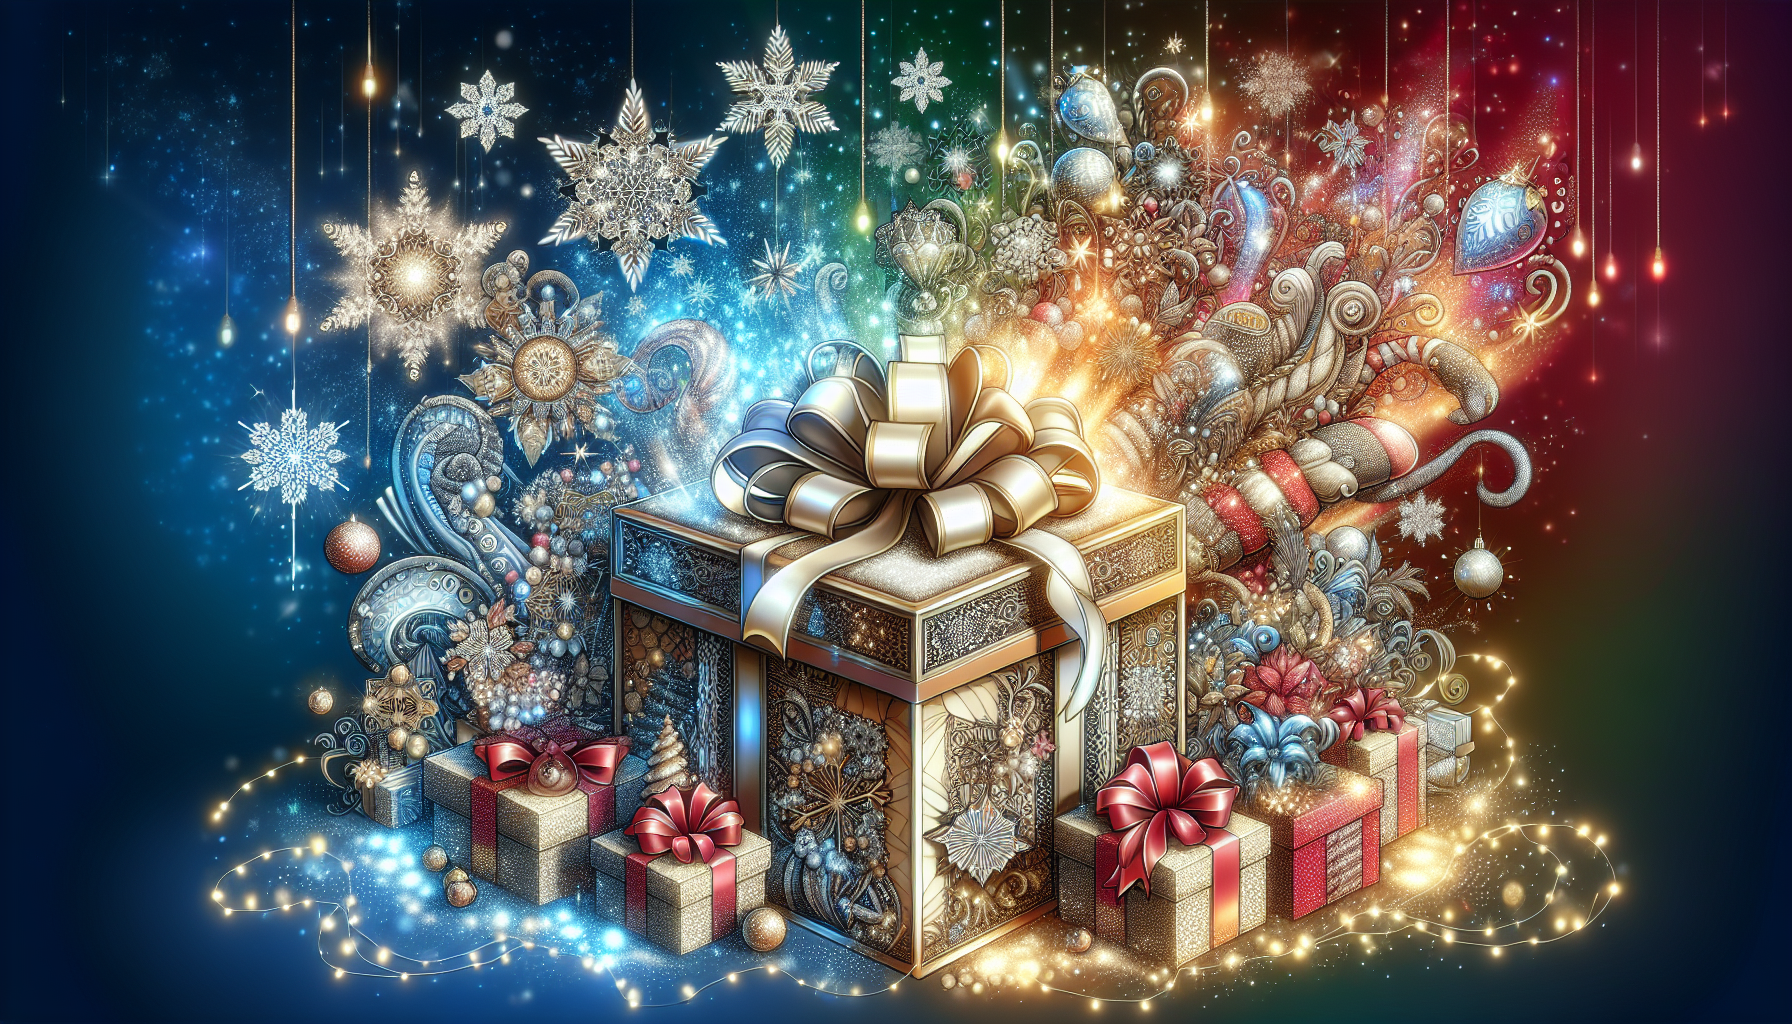 Seasonal and Holiday-Inspired Giveaways